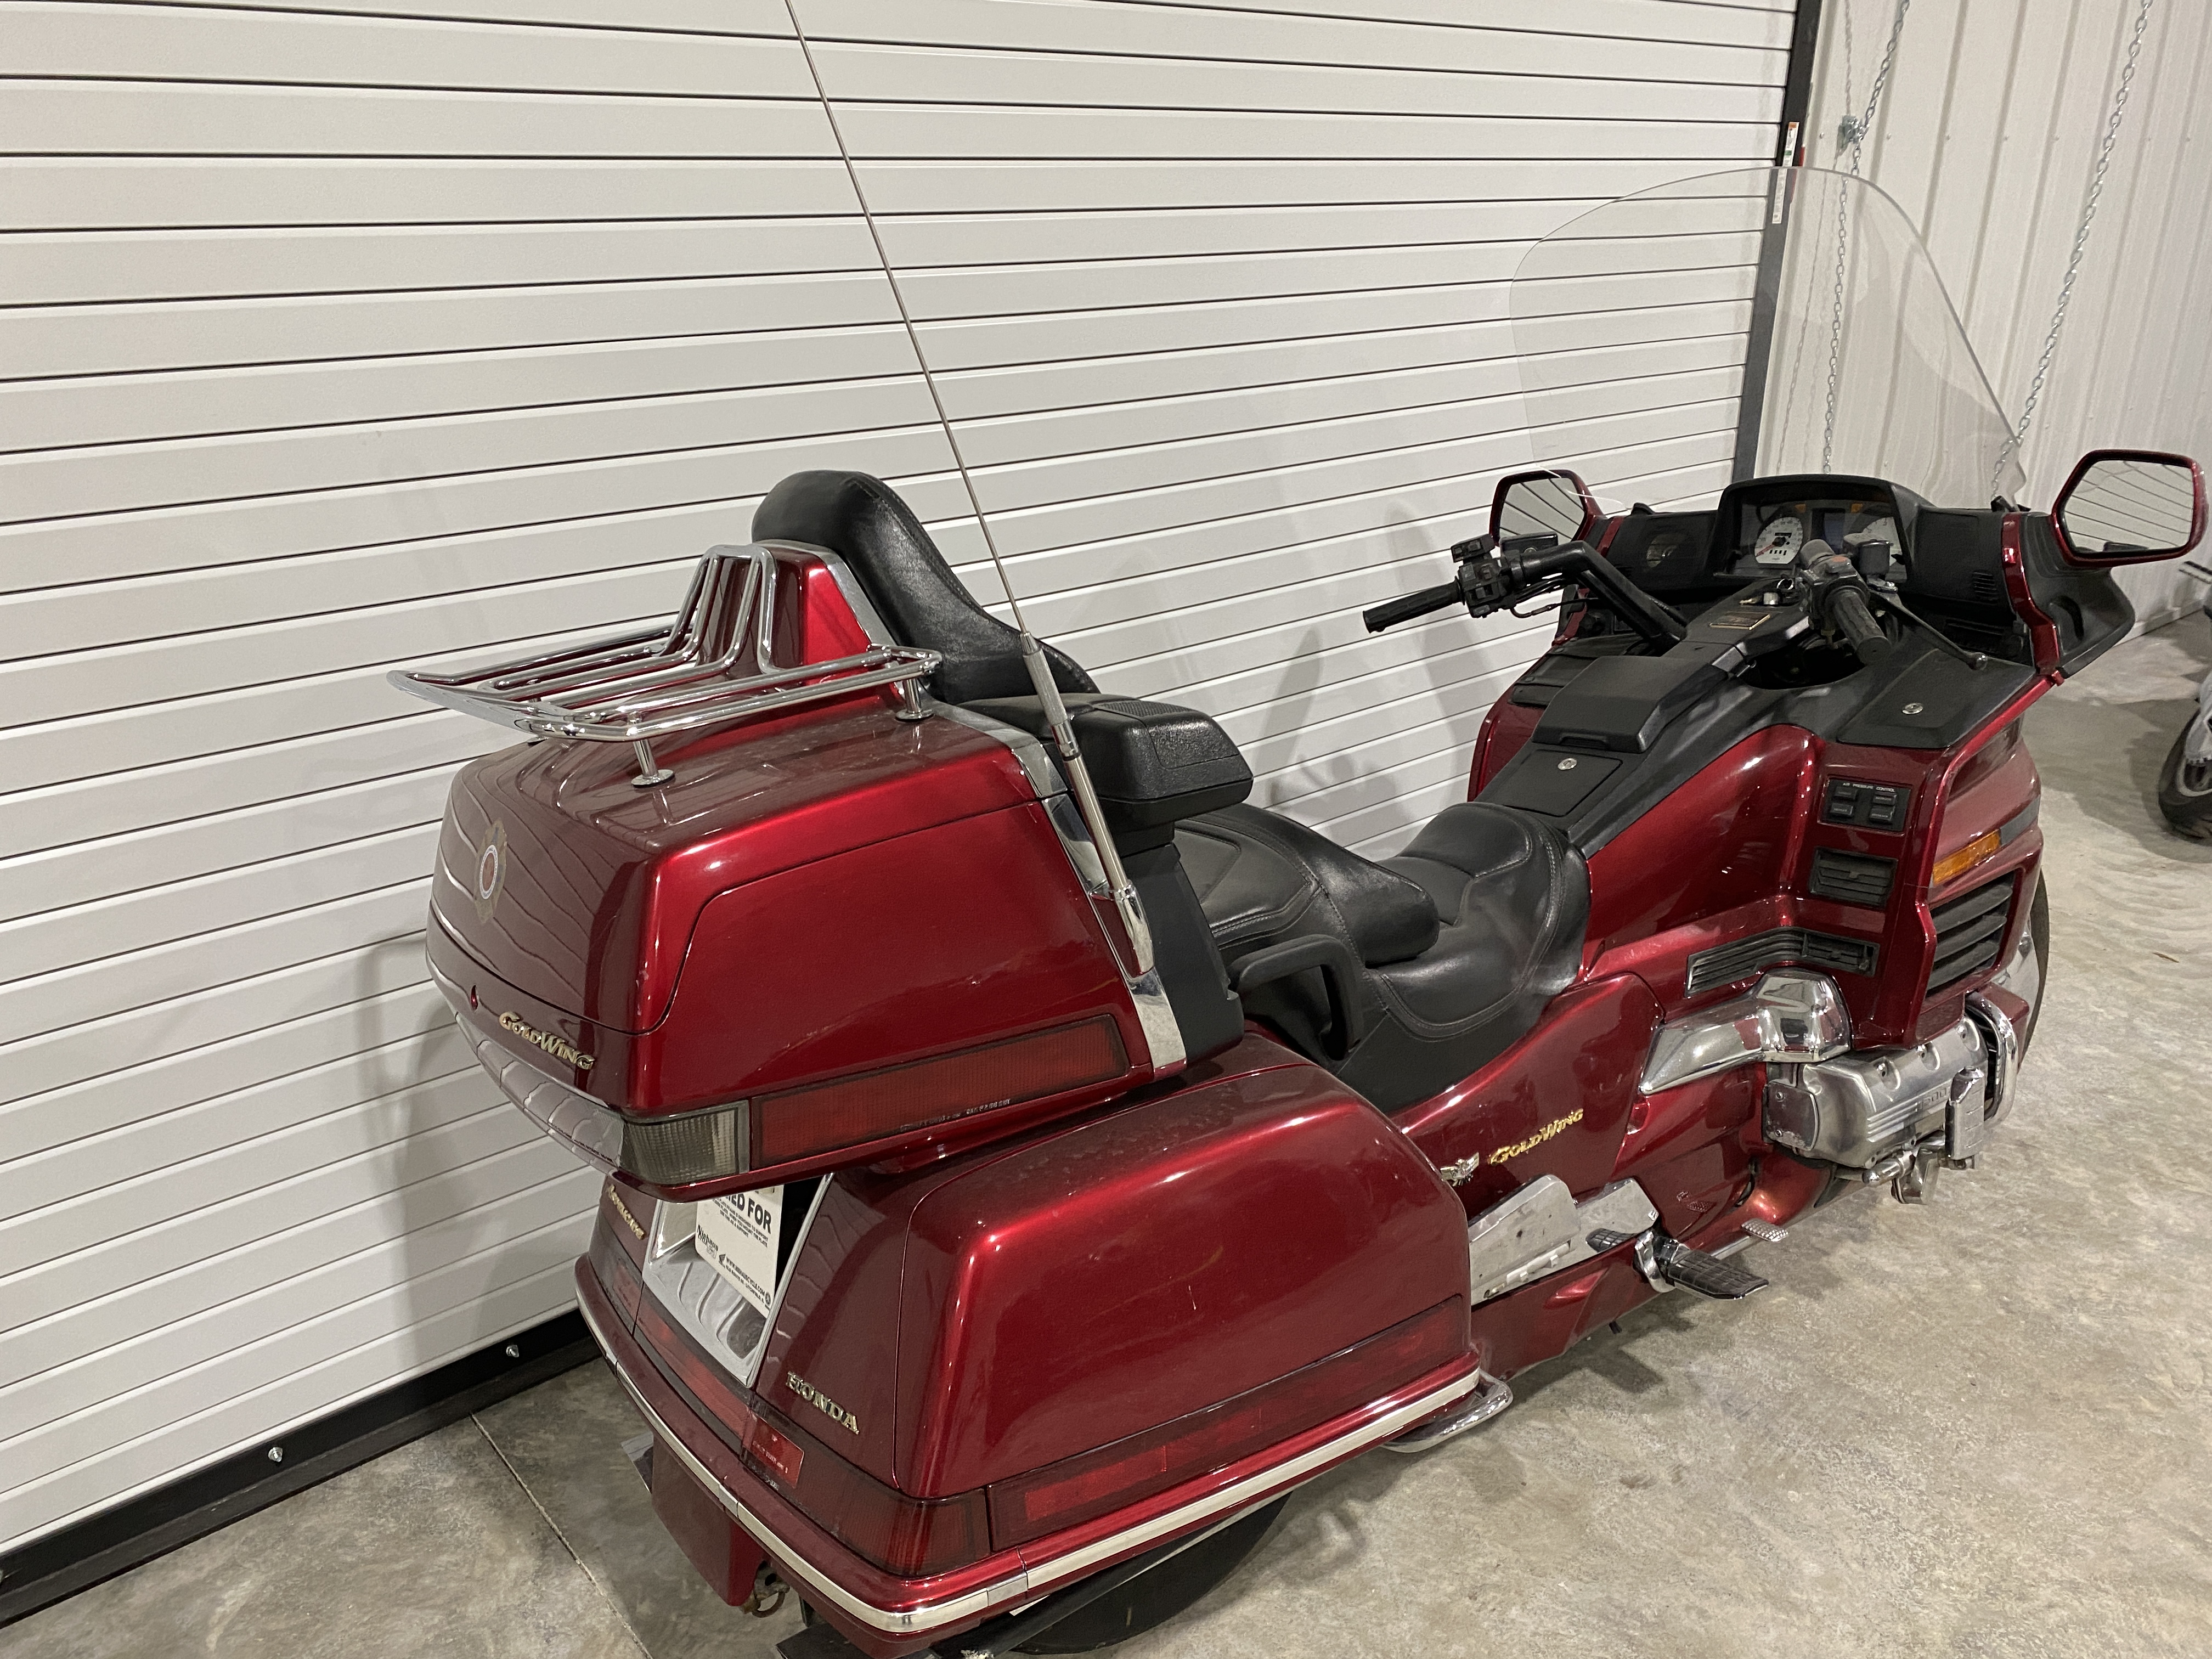 1998 GL1500A GOLD WING ASPENCADE GL1500A GOLD WING ASPENCADE H00536 - Click for larger photo